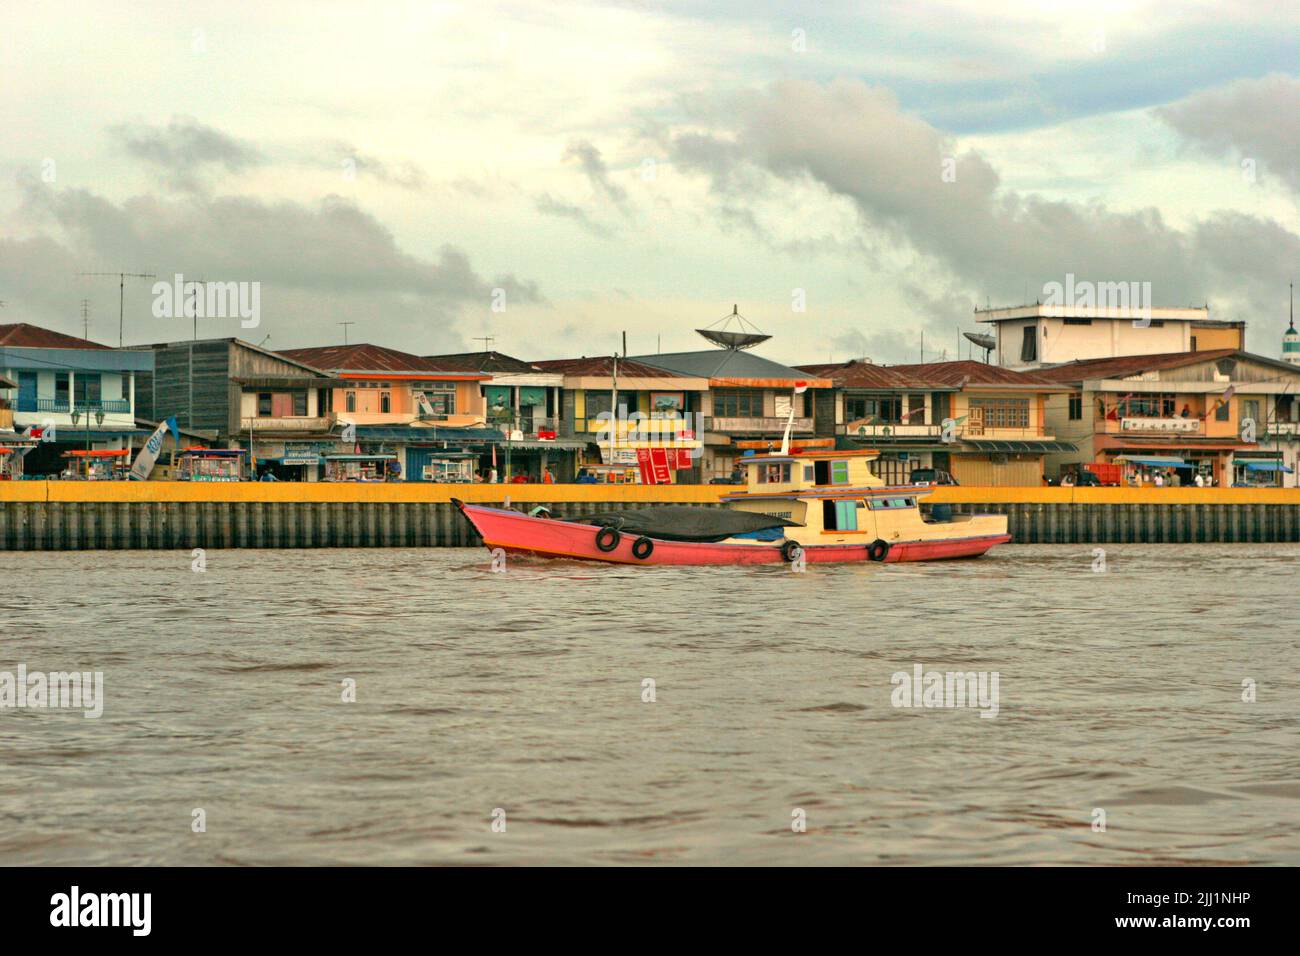 A line of commercial buildings are seen from Segah river in Tanjung Redeb, Berau, East Kalimantan, Indonesia. Stock Photo